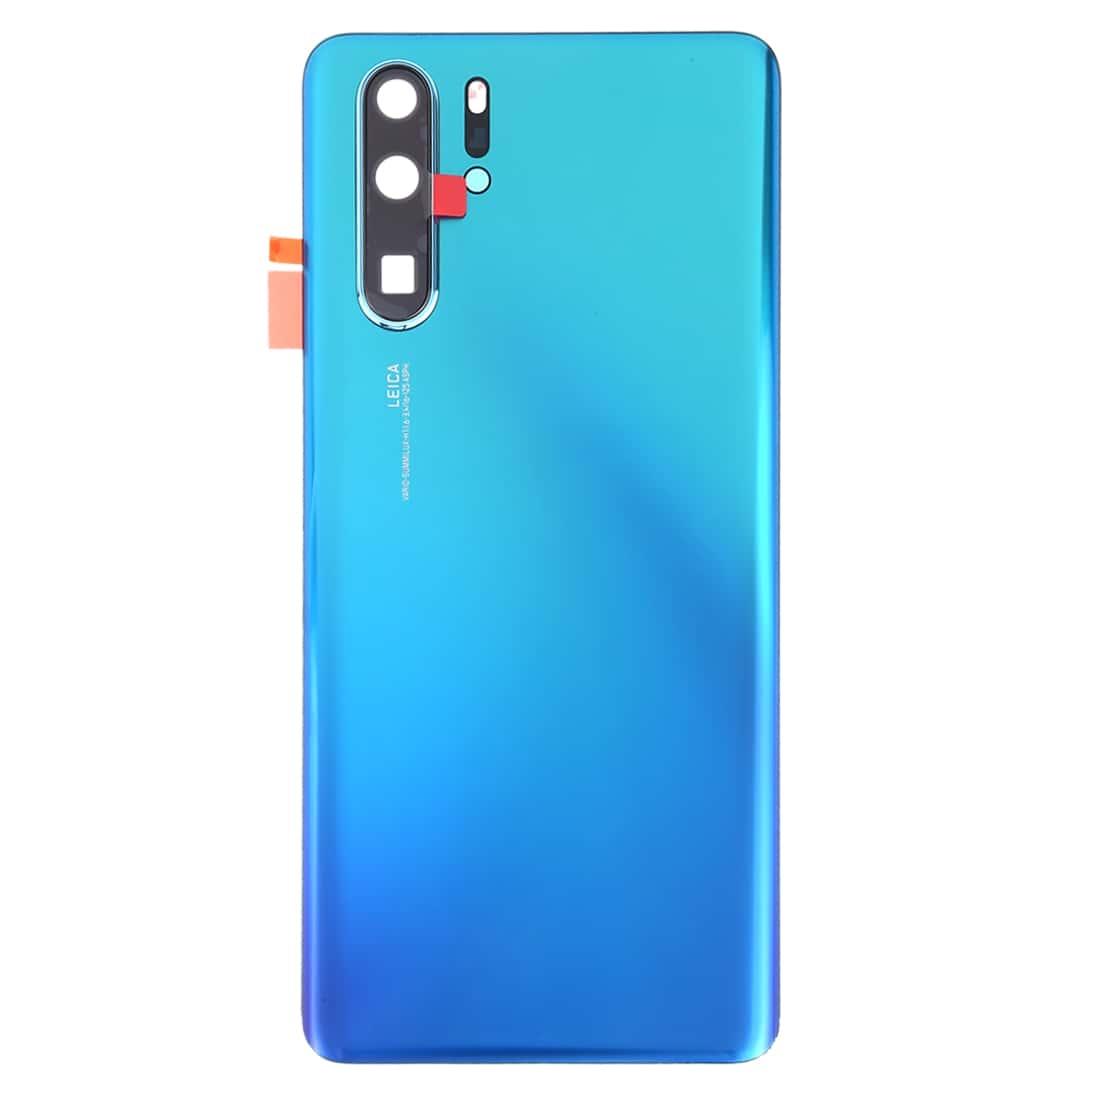 Back Glass Panel for Huawei P30 Pro Twilight with Camera Lens